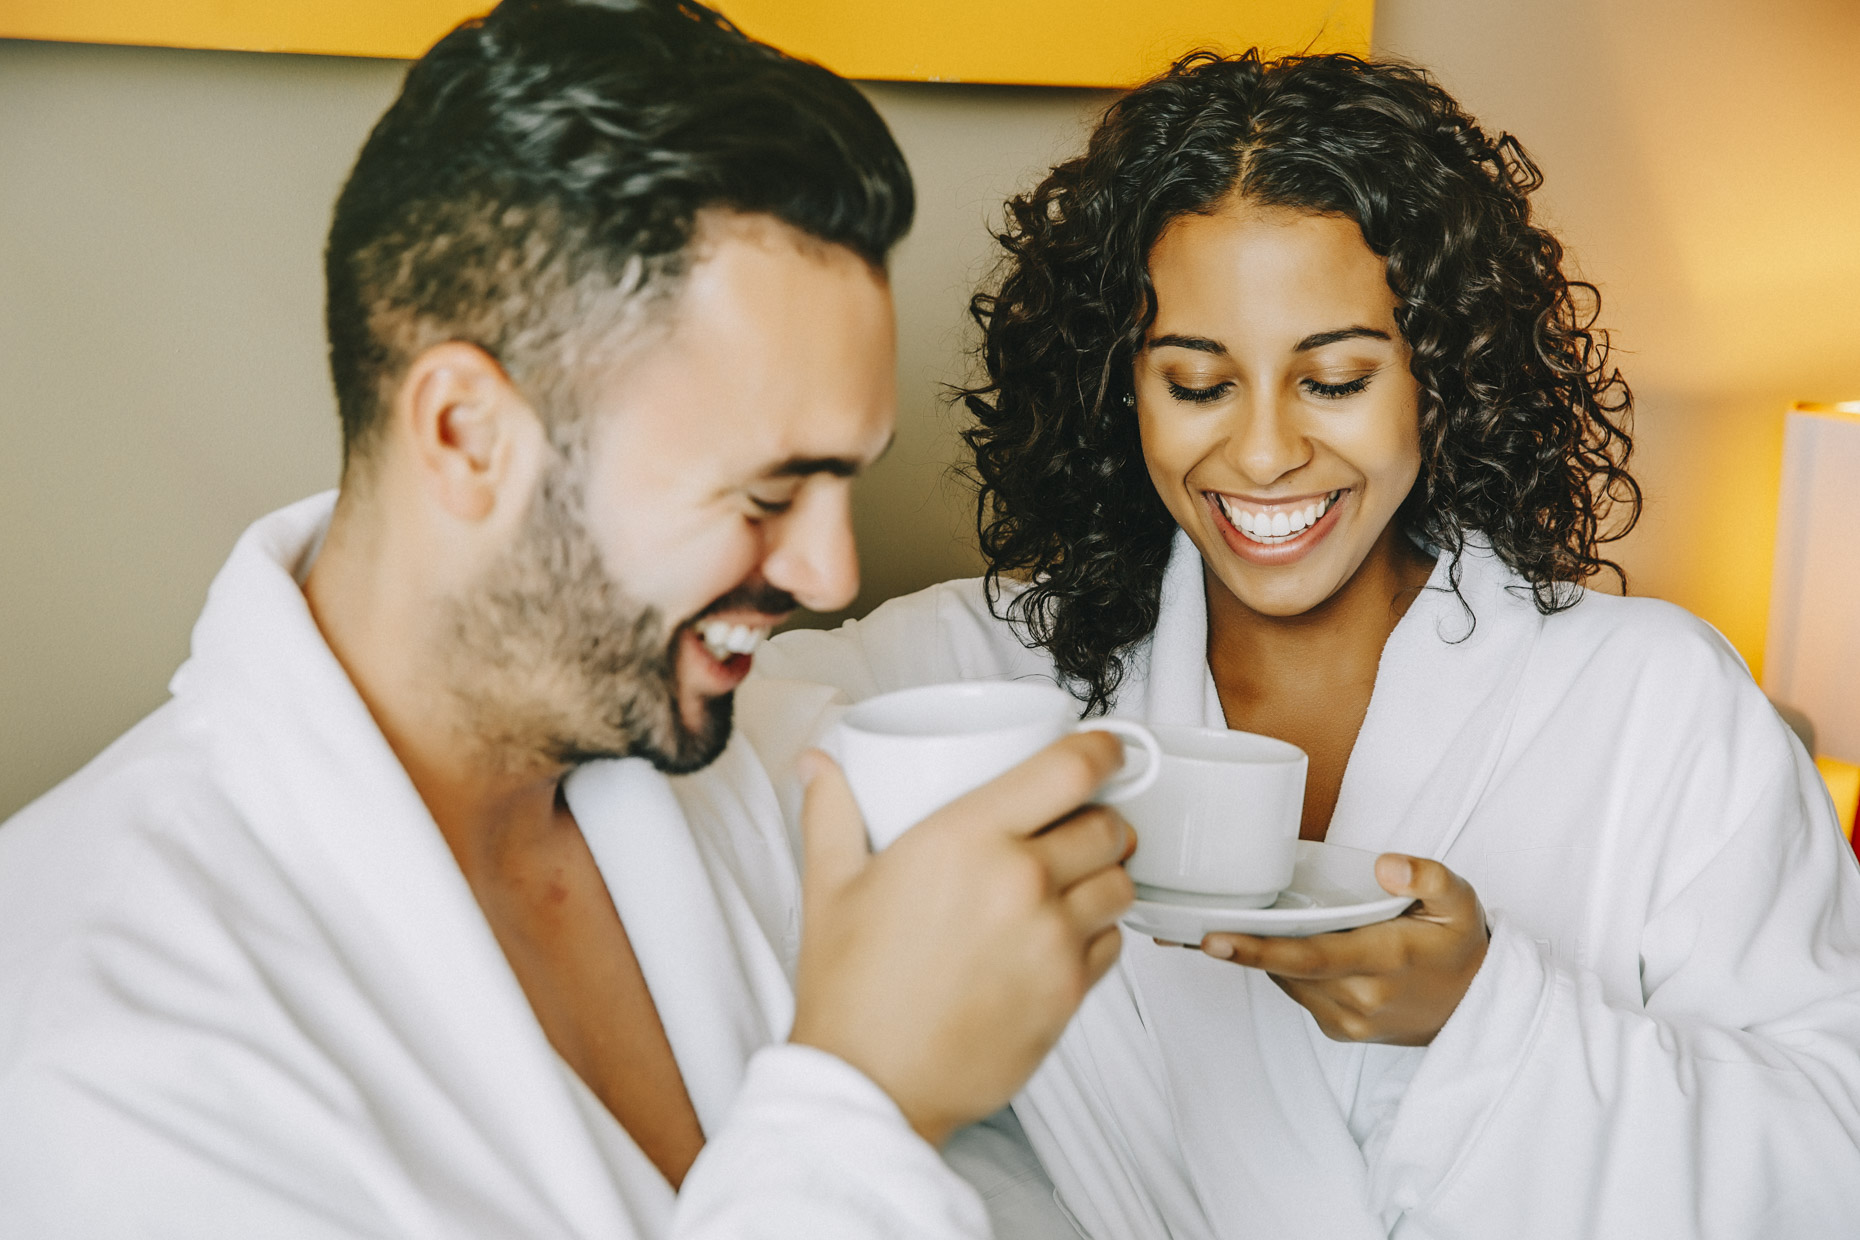 Smiling-couple-in-hotel-bed-drinking-room-service-coffee-Inti_St-Clair-is201504251482